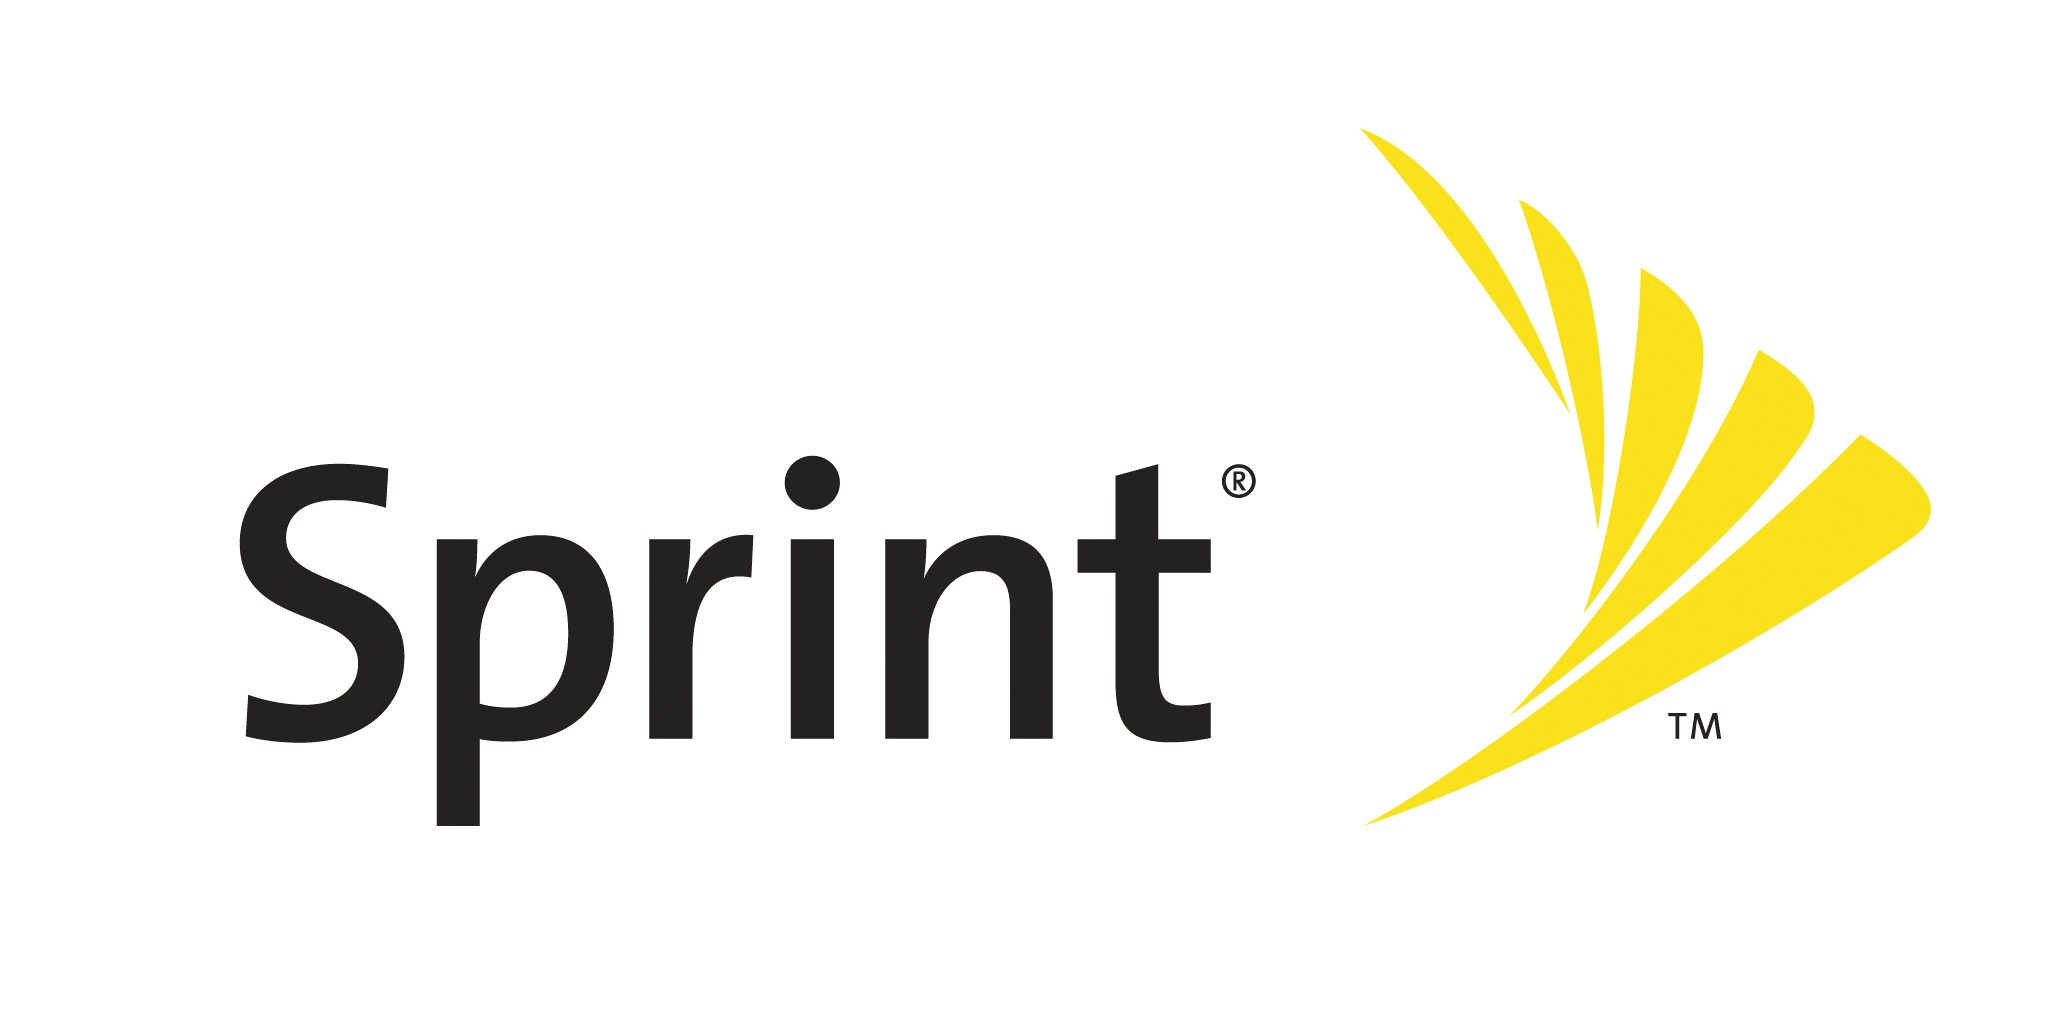 Dallas is one of six cities Sprint Spark is offered in